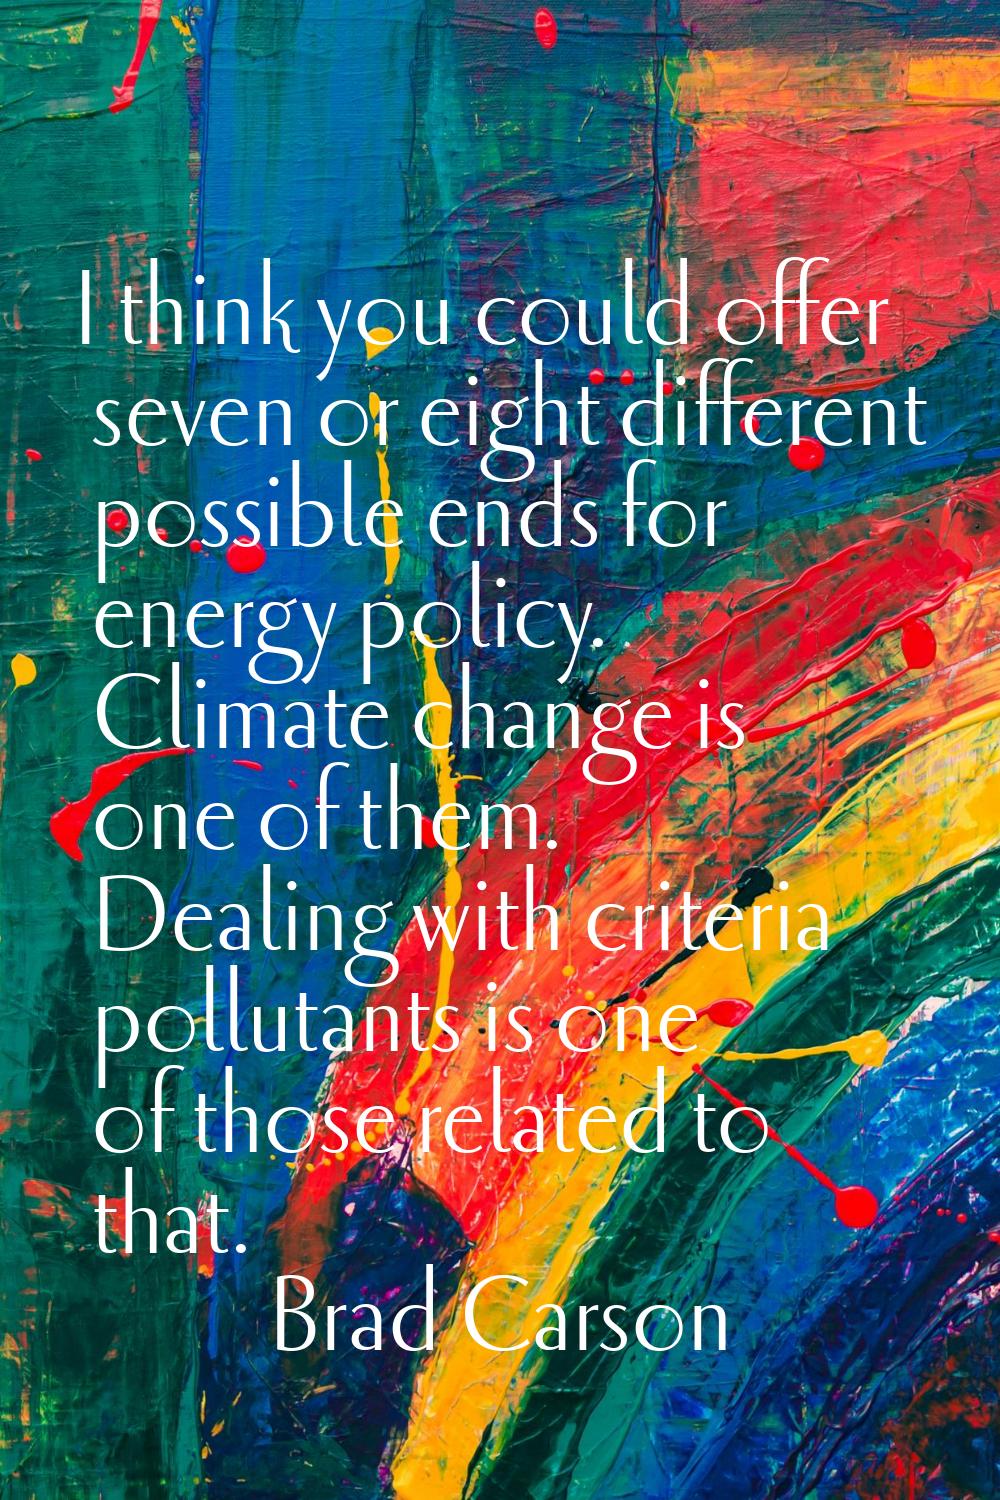 I think you could offer seven or eight different possible ends for energy policy. Climate change is